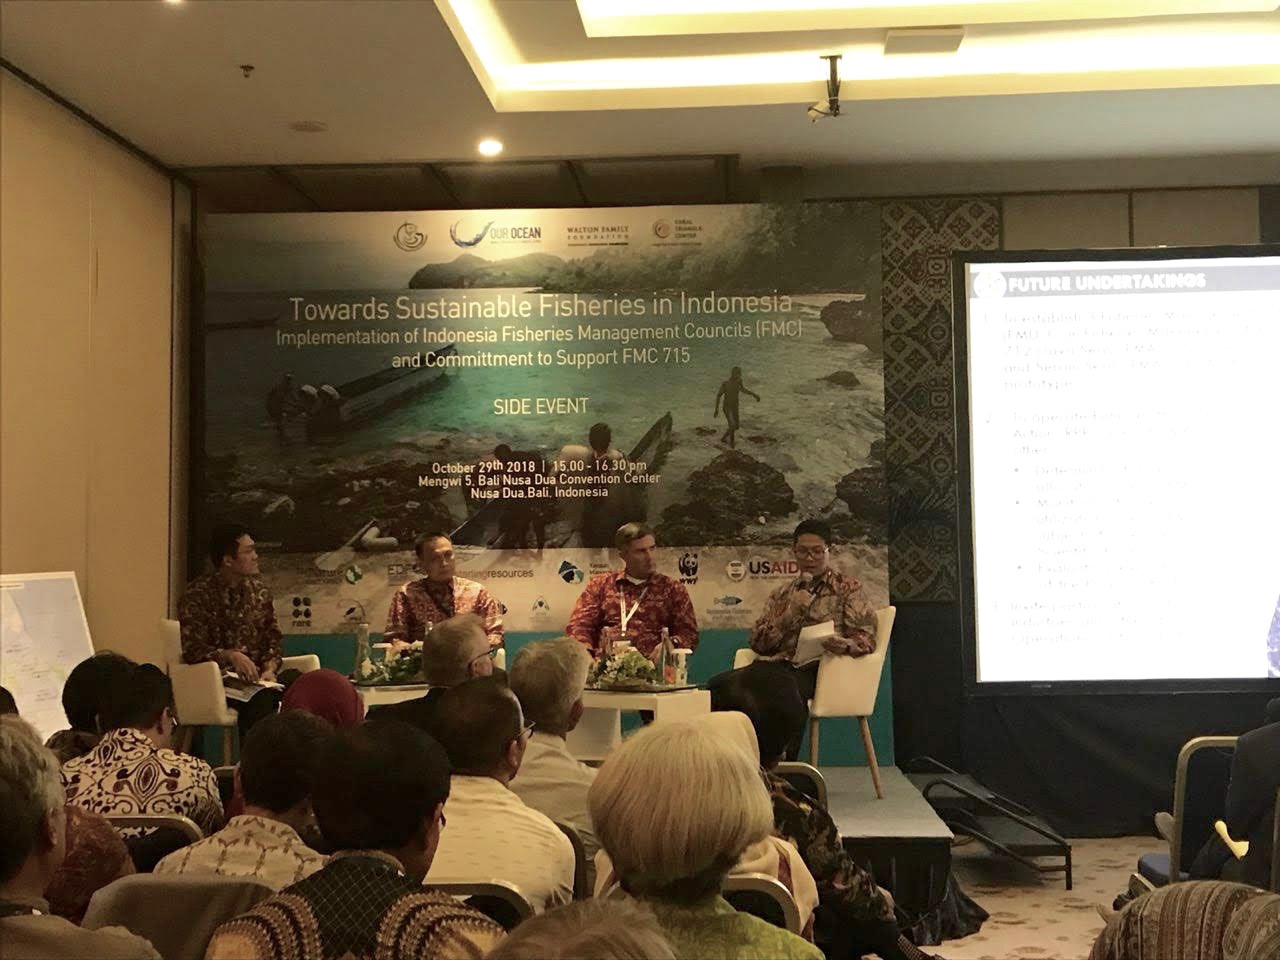  Officials discuss future tasks for achieving sustainable fisheries management in Indonesia during the Our Ocean 2018 conference.  